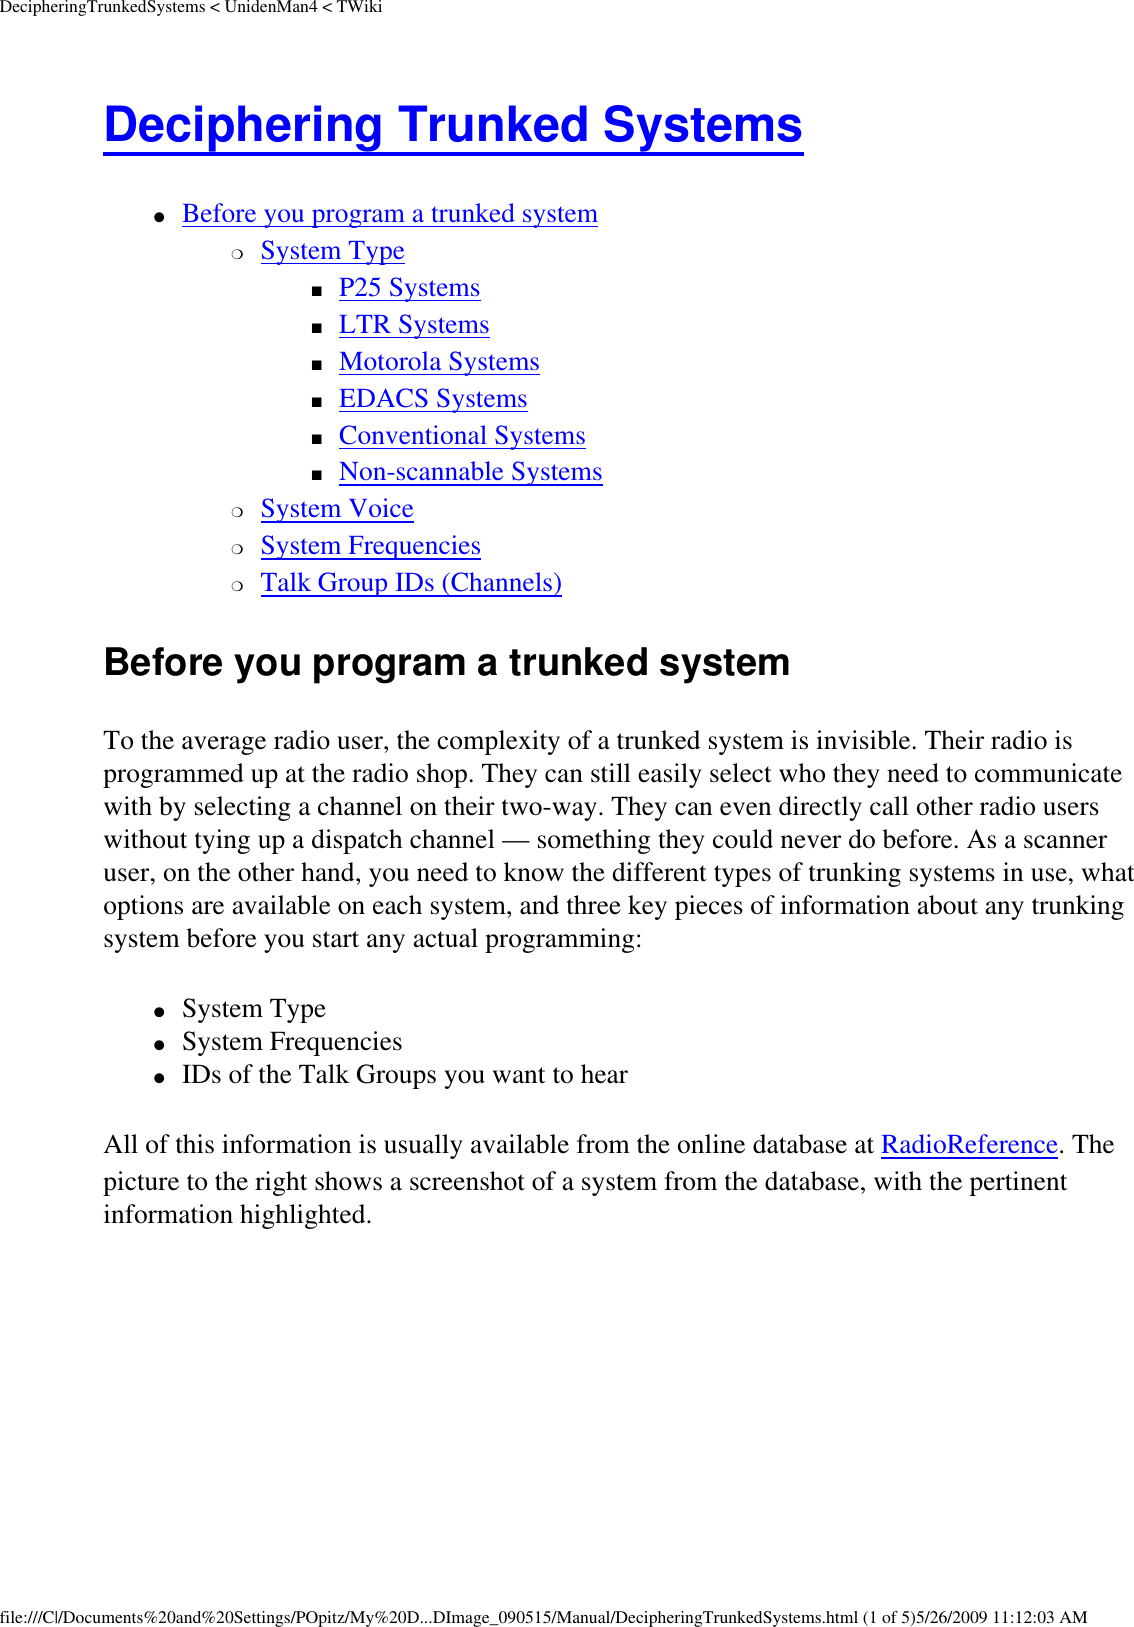 DecipheringTrunkedSystems &lt; UnidenMan4 &lt; TWikiDeciphering Trunked Systems ●     Before you program a trunked system ❍     System Type ■     P25 Systems ■     LTR Systems ■     Motorola Systems ■     EDACS Systems ■     Conventional Systems ■     Non-scannable Systems ❍     System Voice ❍     System Frequencies ❍     Talk Group IDs (Channels) Before you program a trunked system To the average radio user, the complexity of a trunked system is invisible. Their radio is programmed up at the radio shop. They can still easily select who they need to communicate with by selecting a channel on their two-way. They can even directly call other radio users without tying up a dispatch channel — something they could never do before. As a scanner user, on the other hand, you need to know the different types of trunking systems in use, what options are available on each system, and three key pieces of information about any trunking system before you start any actual programming: ●     System Type ●     System Frequencies ●     IDs of the Talk Groups you want to hear All of this information is usually available from the online database at RadioReference. The picture to the right shows a screenshot of a system from the database, with the pertinent information highlighted. file:///C|/Documents%20and%20Settings/POpitz/My%20D...DImage_090515/Manual/DecipheringTrunkedSystems.html (1 of 5)5/26/2009 11:12:03 AM